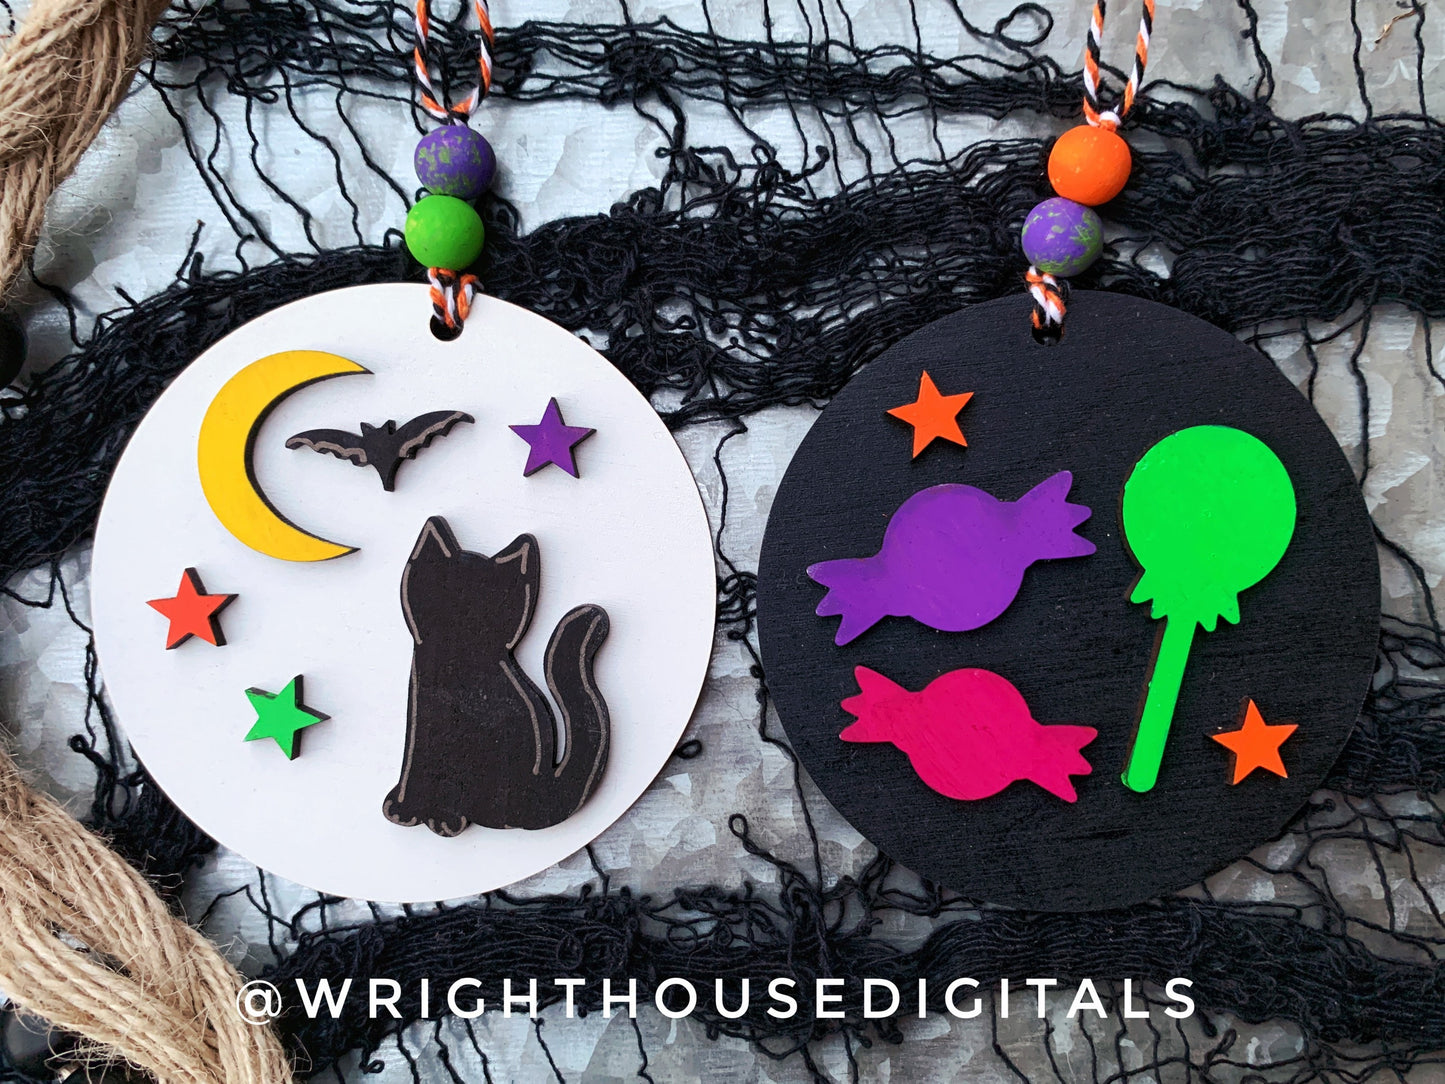 Halloween Icons Black Cat and Candy Mini Set - Spooky Handdrawn DIY Doodle Ornaments - Cut File For Glowforge Lasers - Digital SVG File